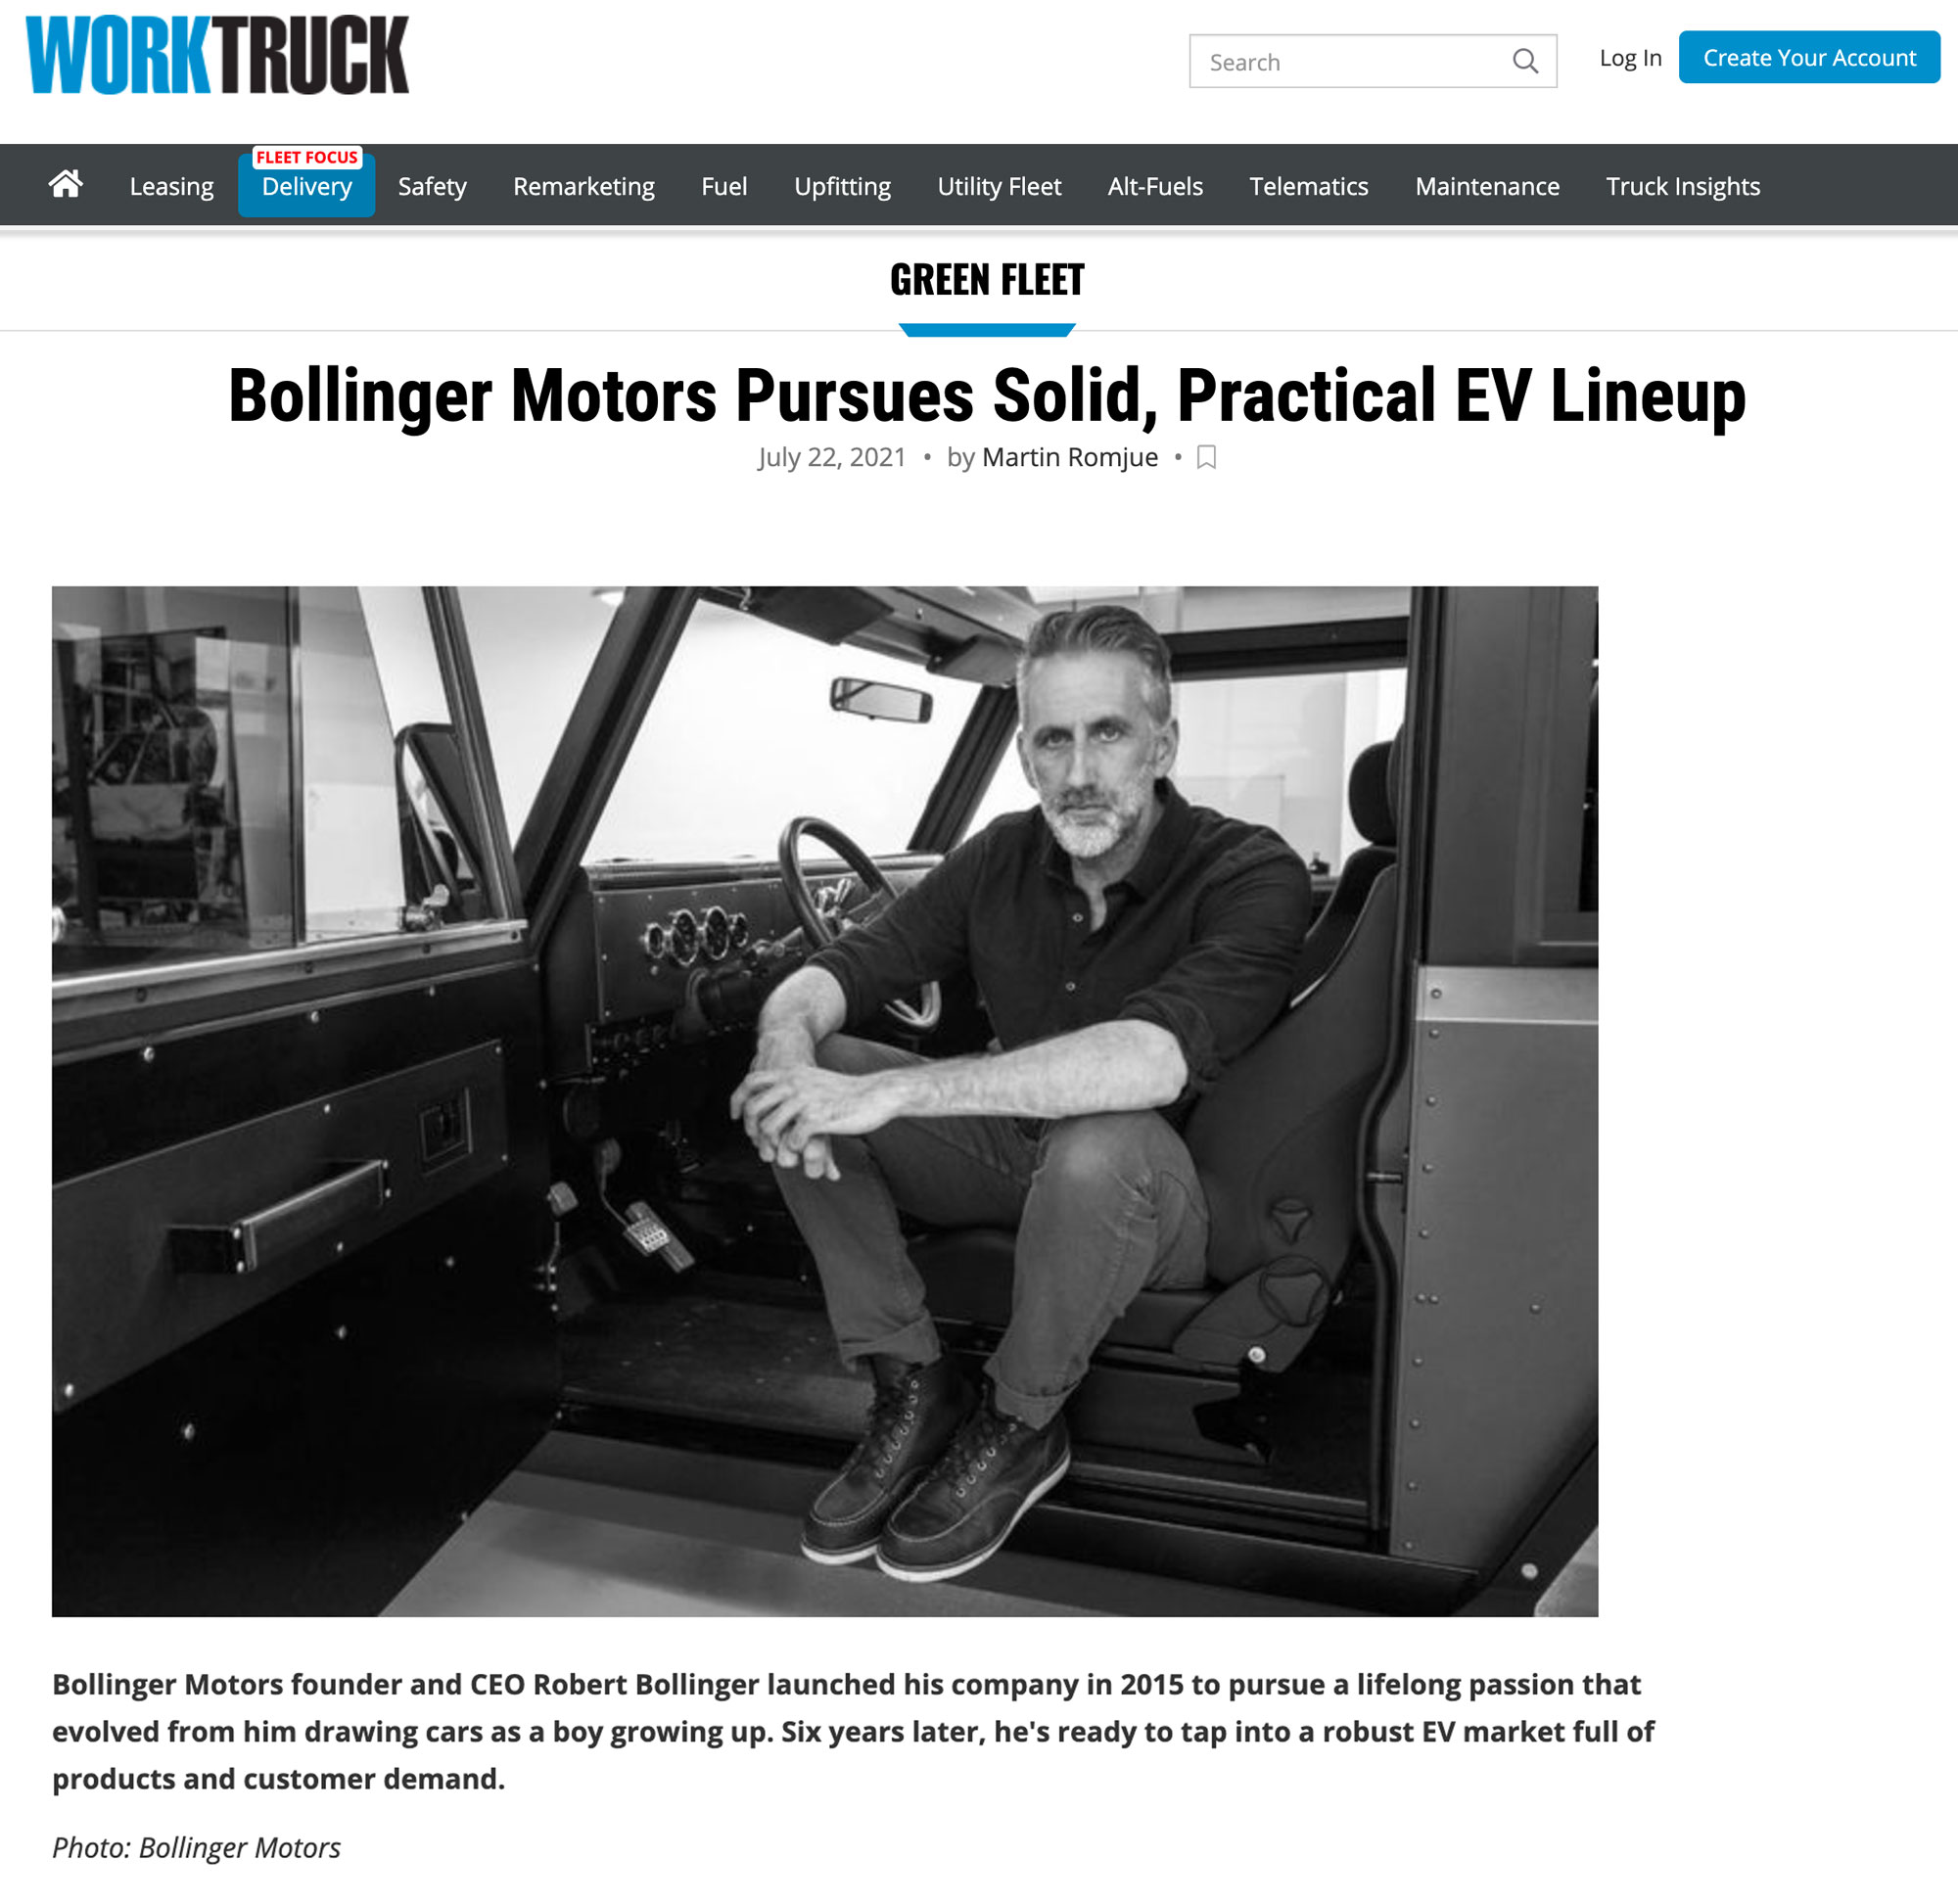 Ceo Robert Bollinger on cover of Work Truck Article